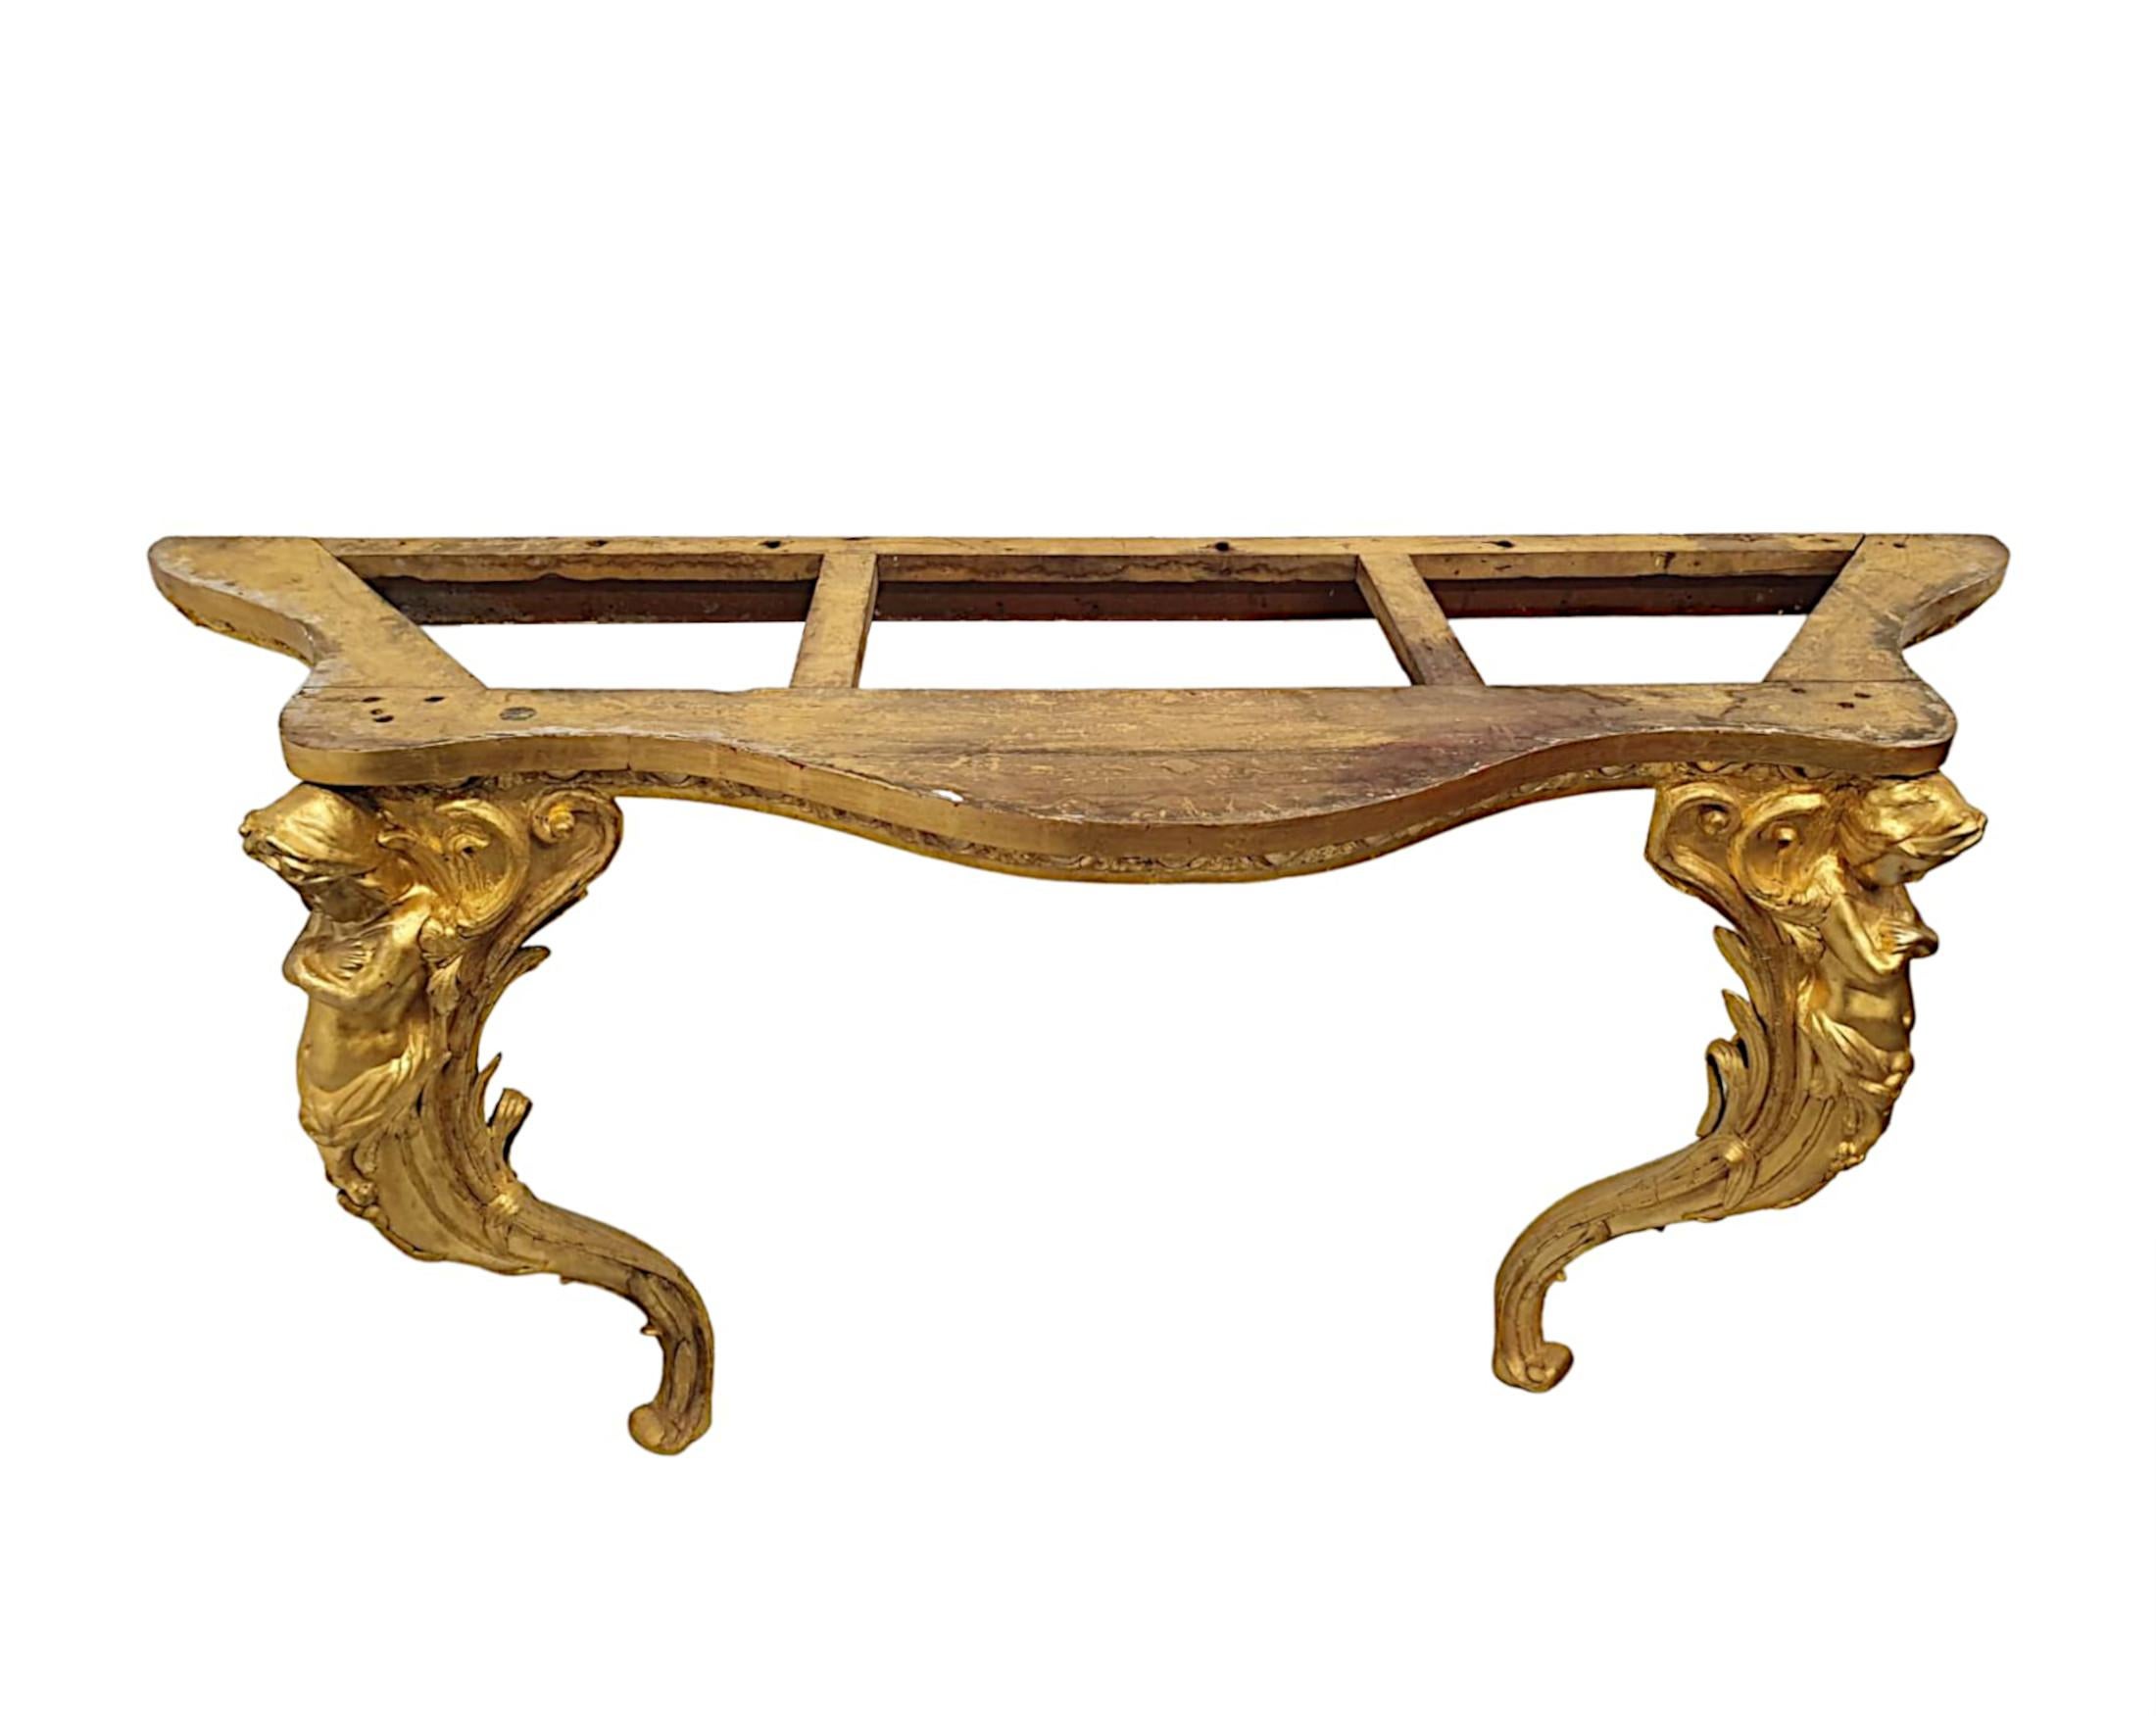  A Very Fine and Rare 19th Century marble Top Giltwood Console Table  For Sale 2